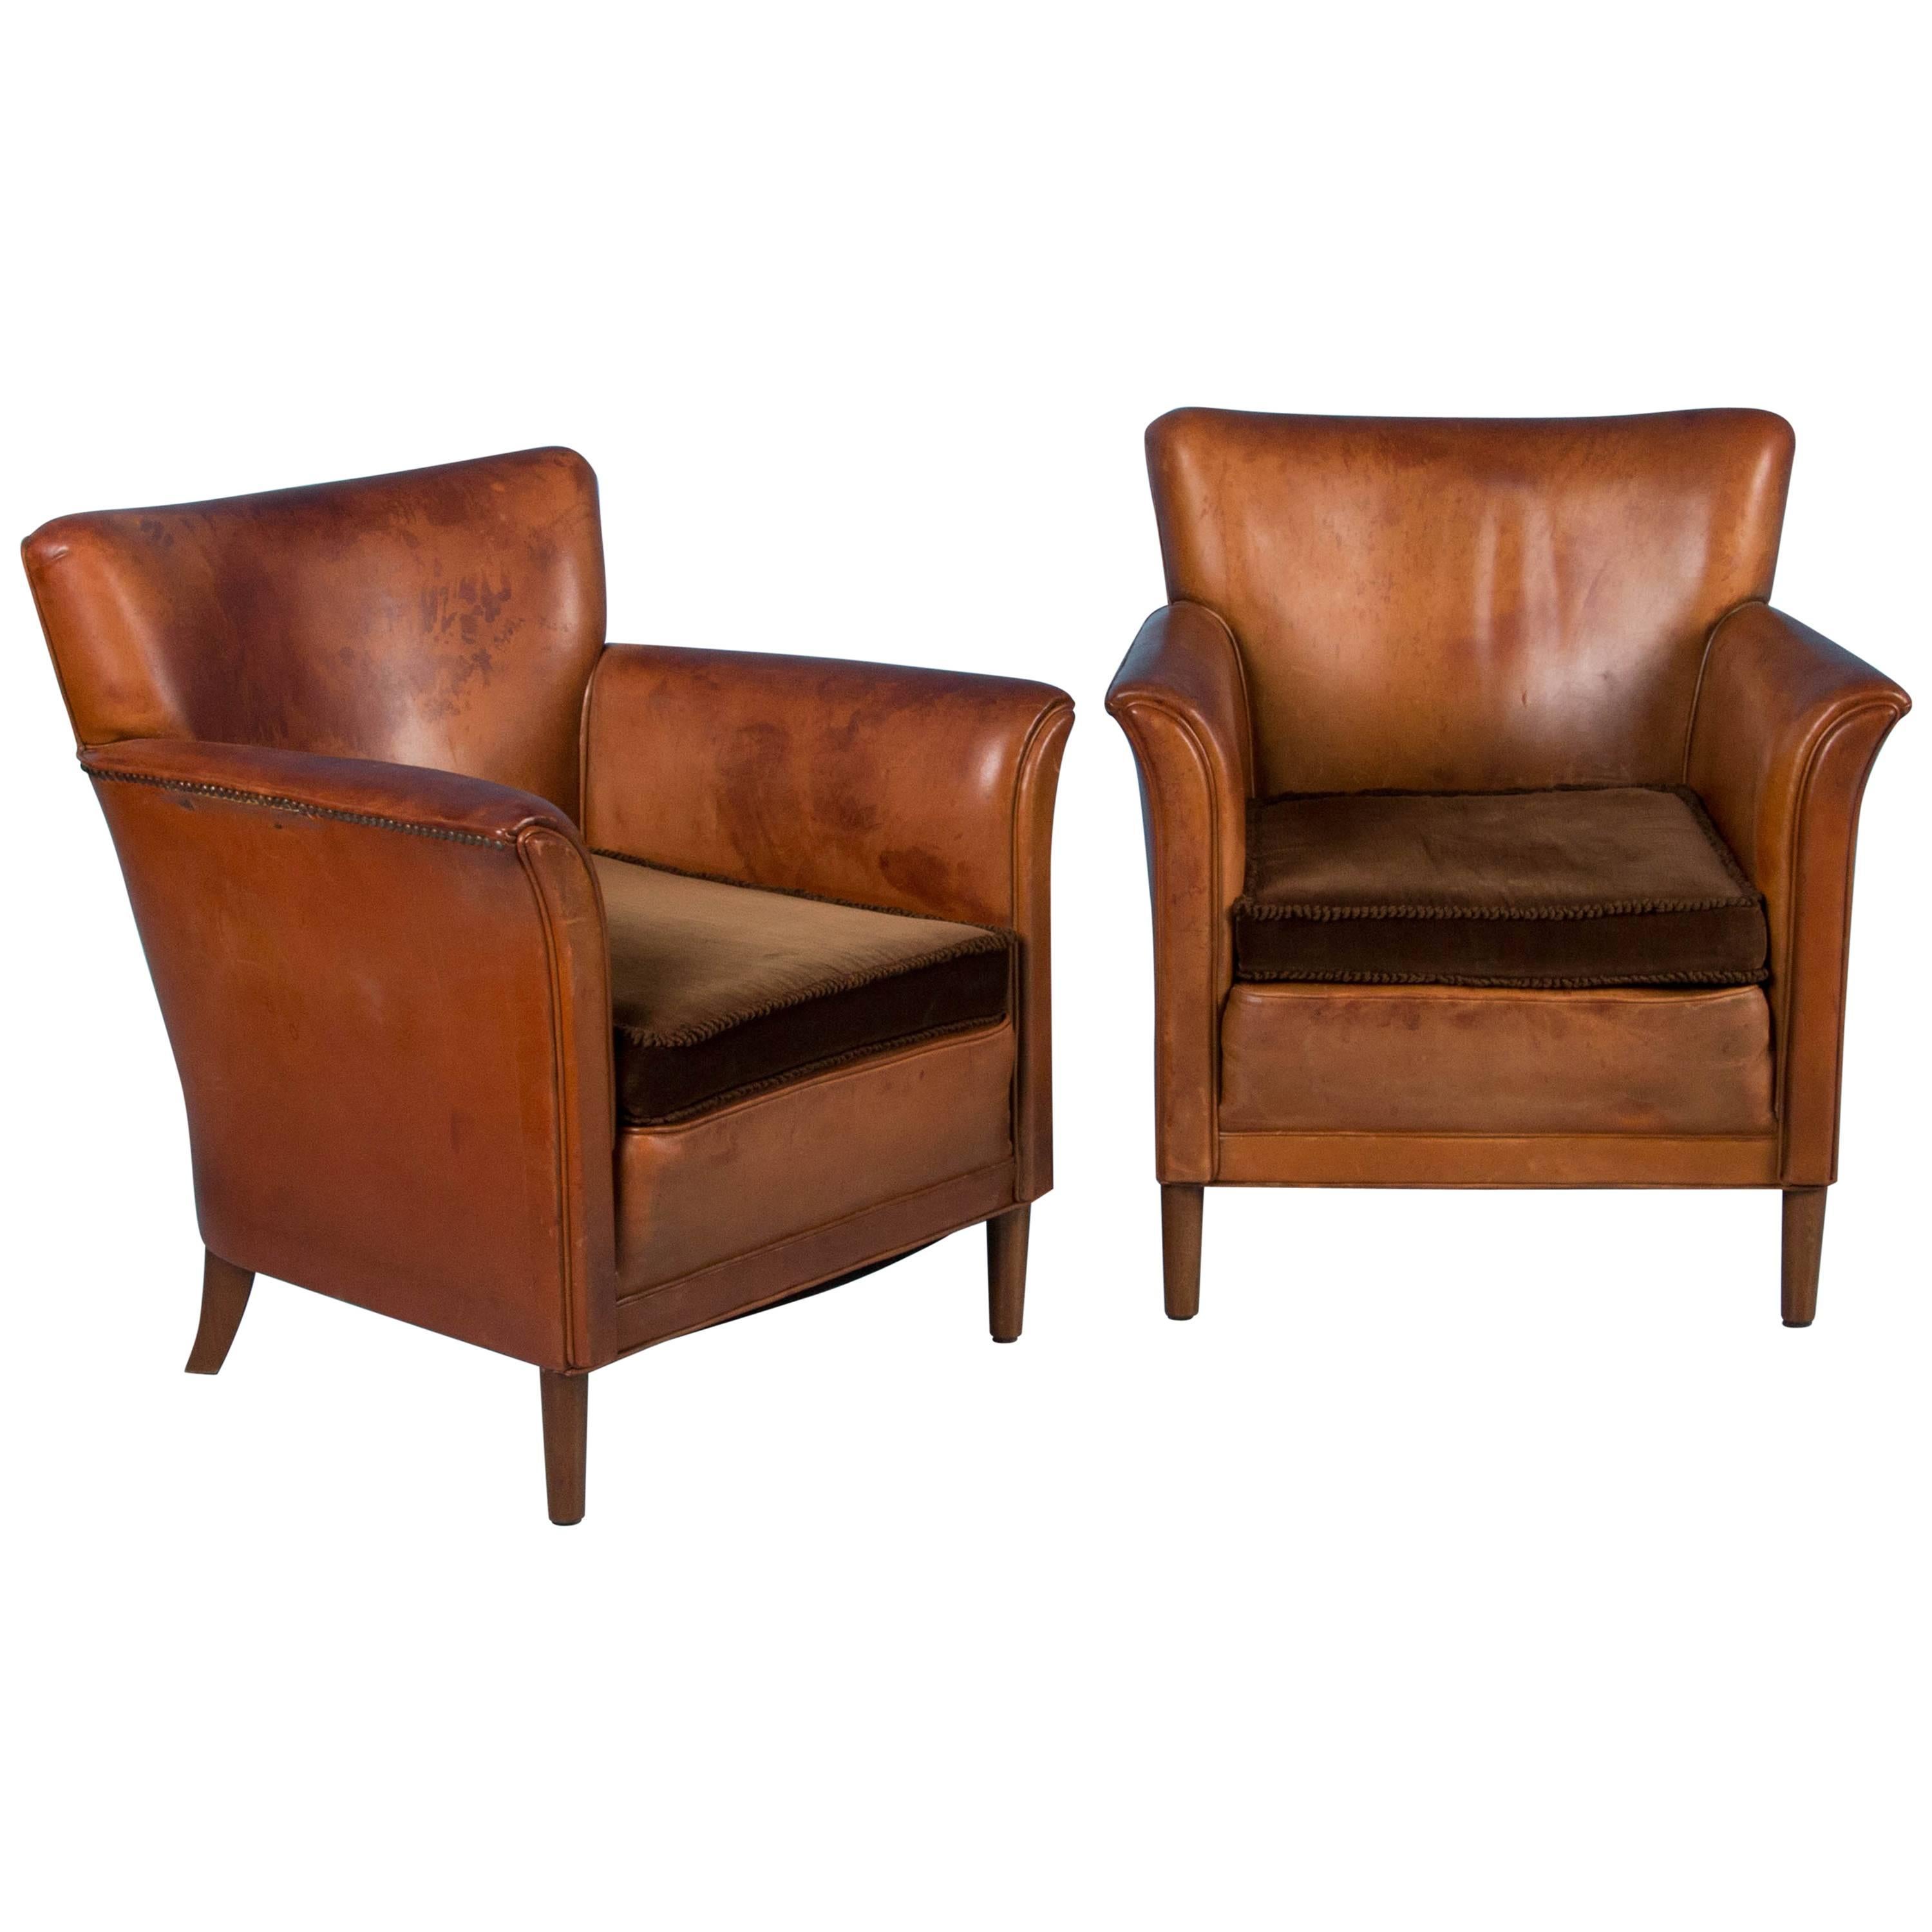 Pair of Vintage Danish Leather Club Chairs with Cushion Seats